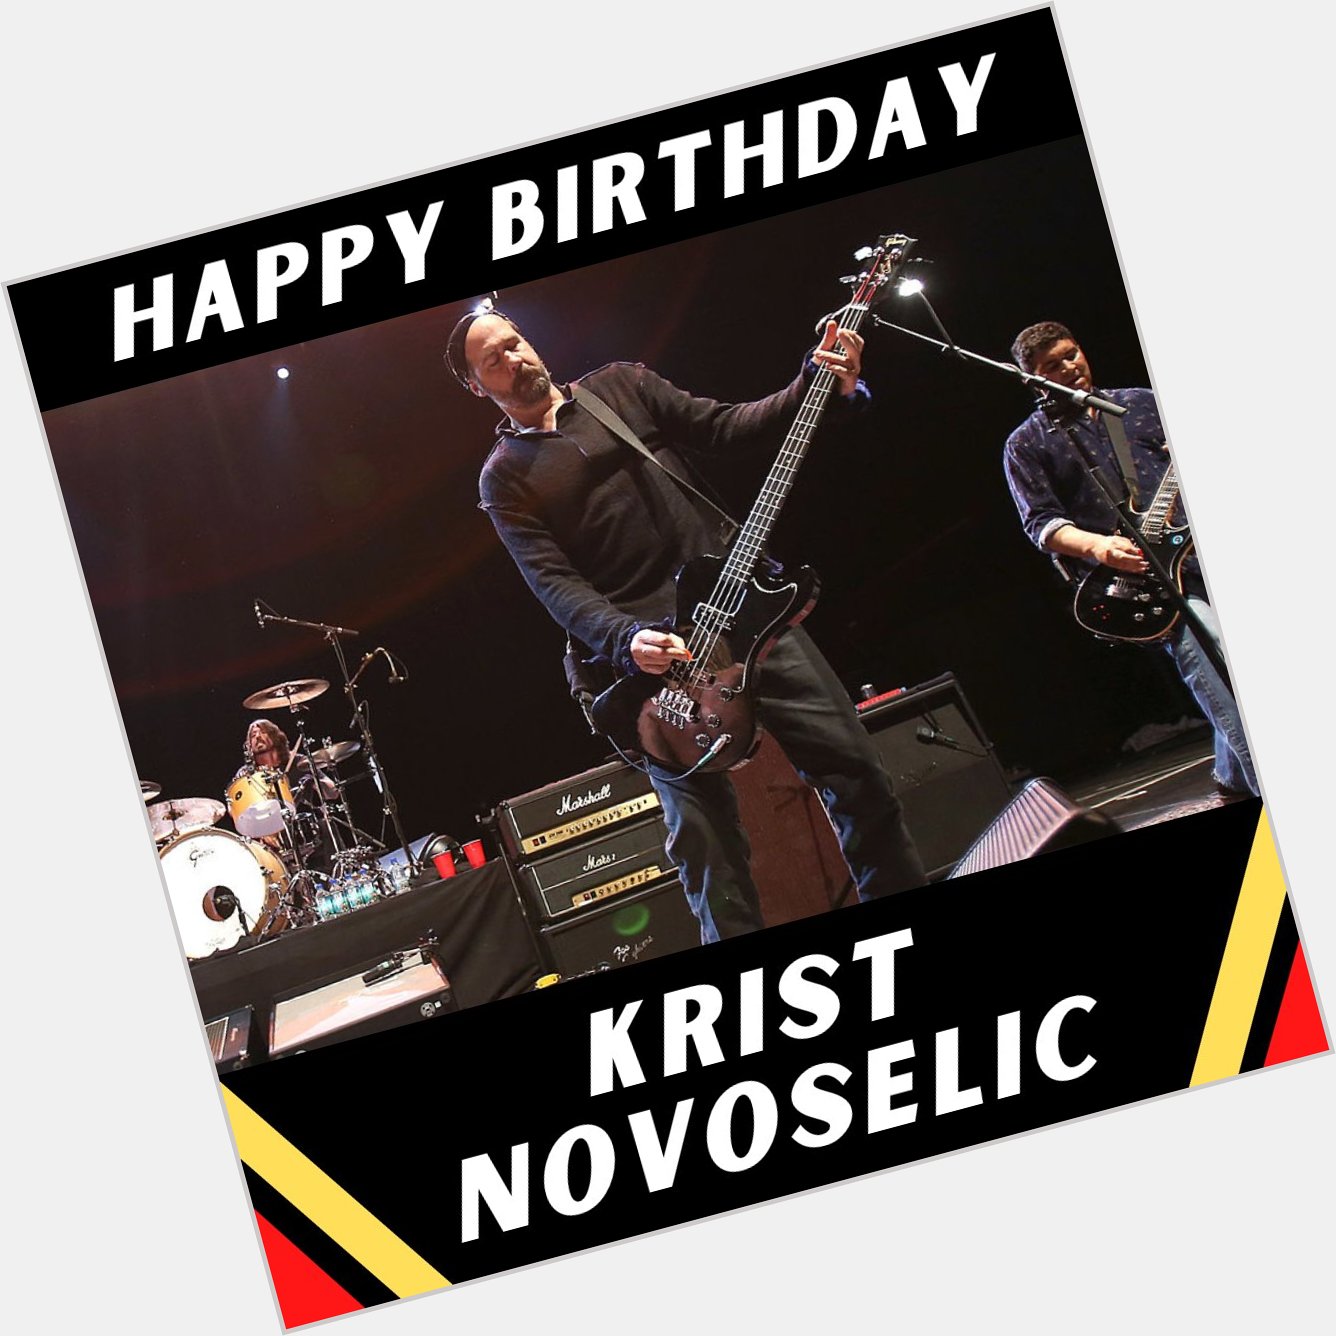 Wishing a happy birthday to co-founder Krist Novoselic  Mike Lawrie/Getty Images 